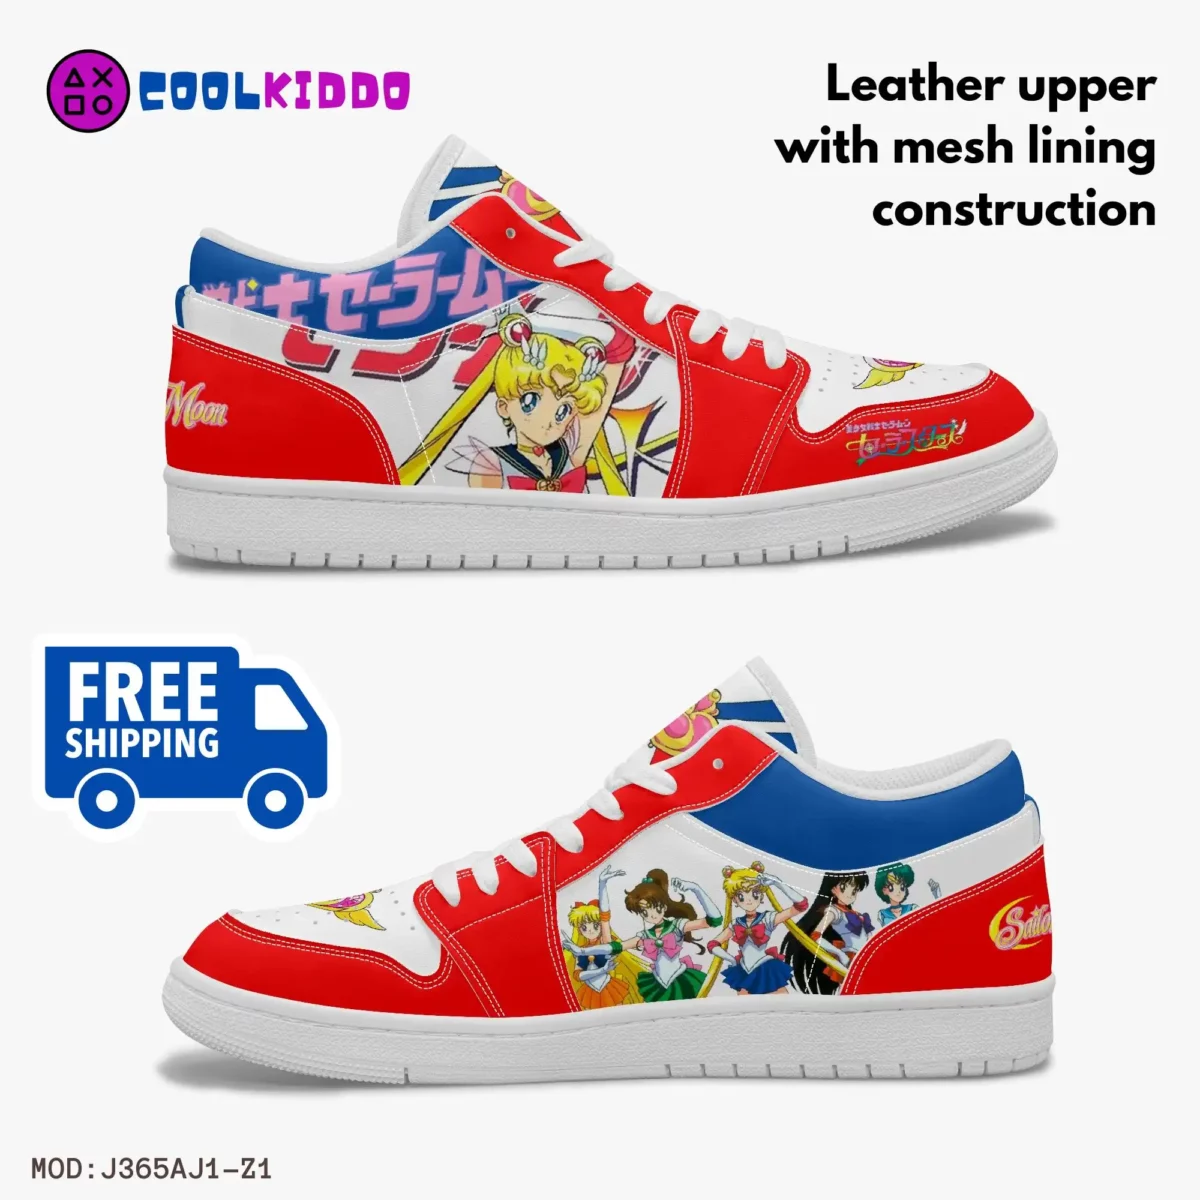 Salior Moon Anime Series Inspired Low-Top Leather Sneakers for youth/adults. Character Print Shoes Cool Kiddo 18